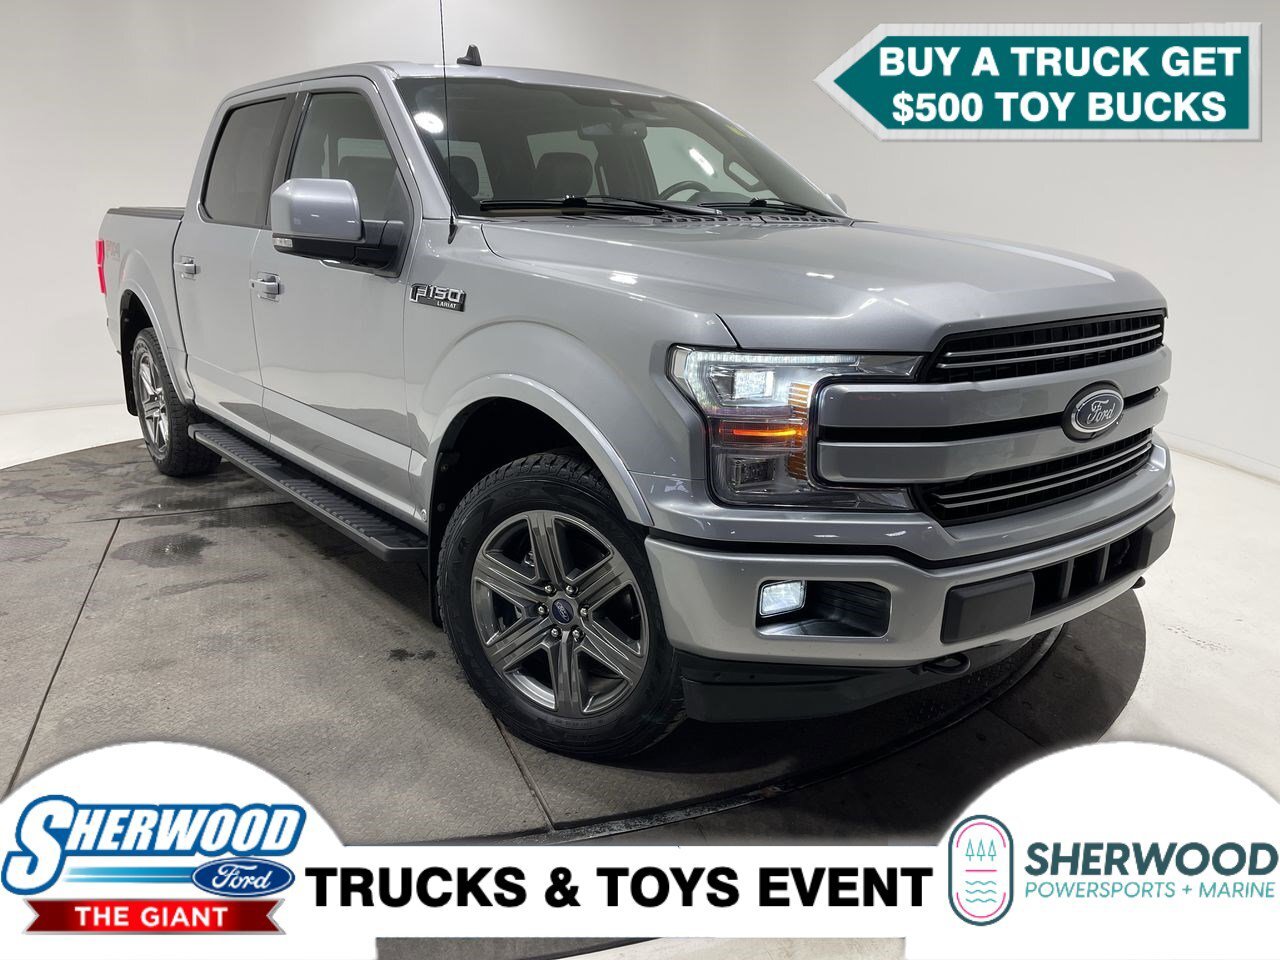 2020 Ford F-150 Lariat - $0 Down $191 Weekly - TONNEAU - TOW PKG